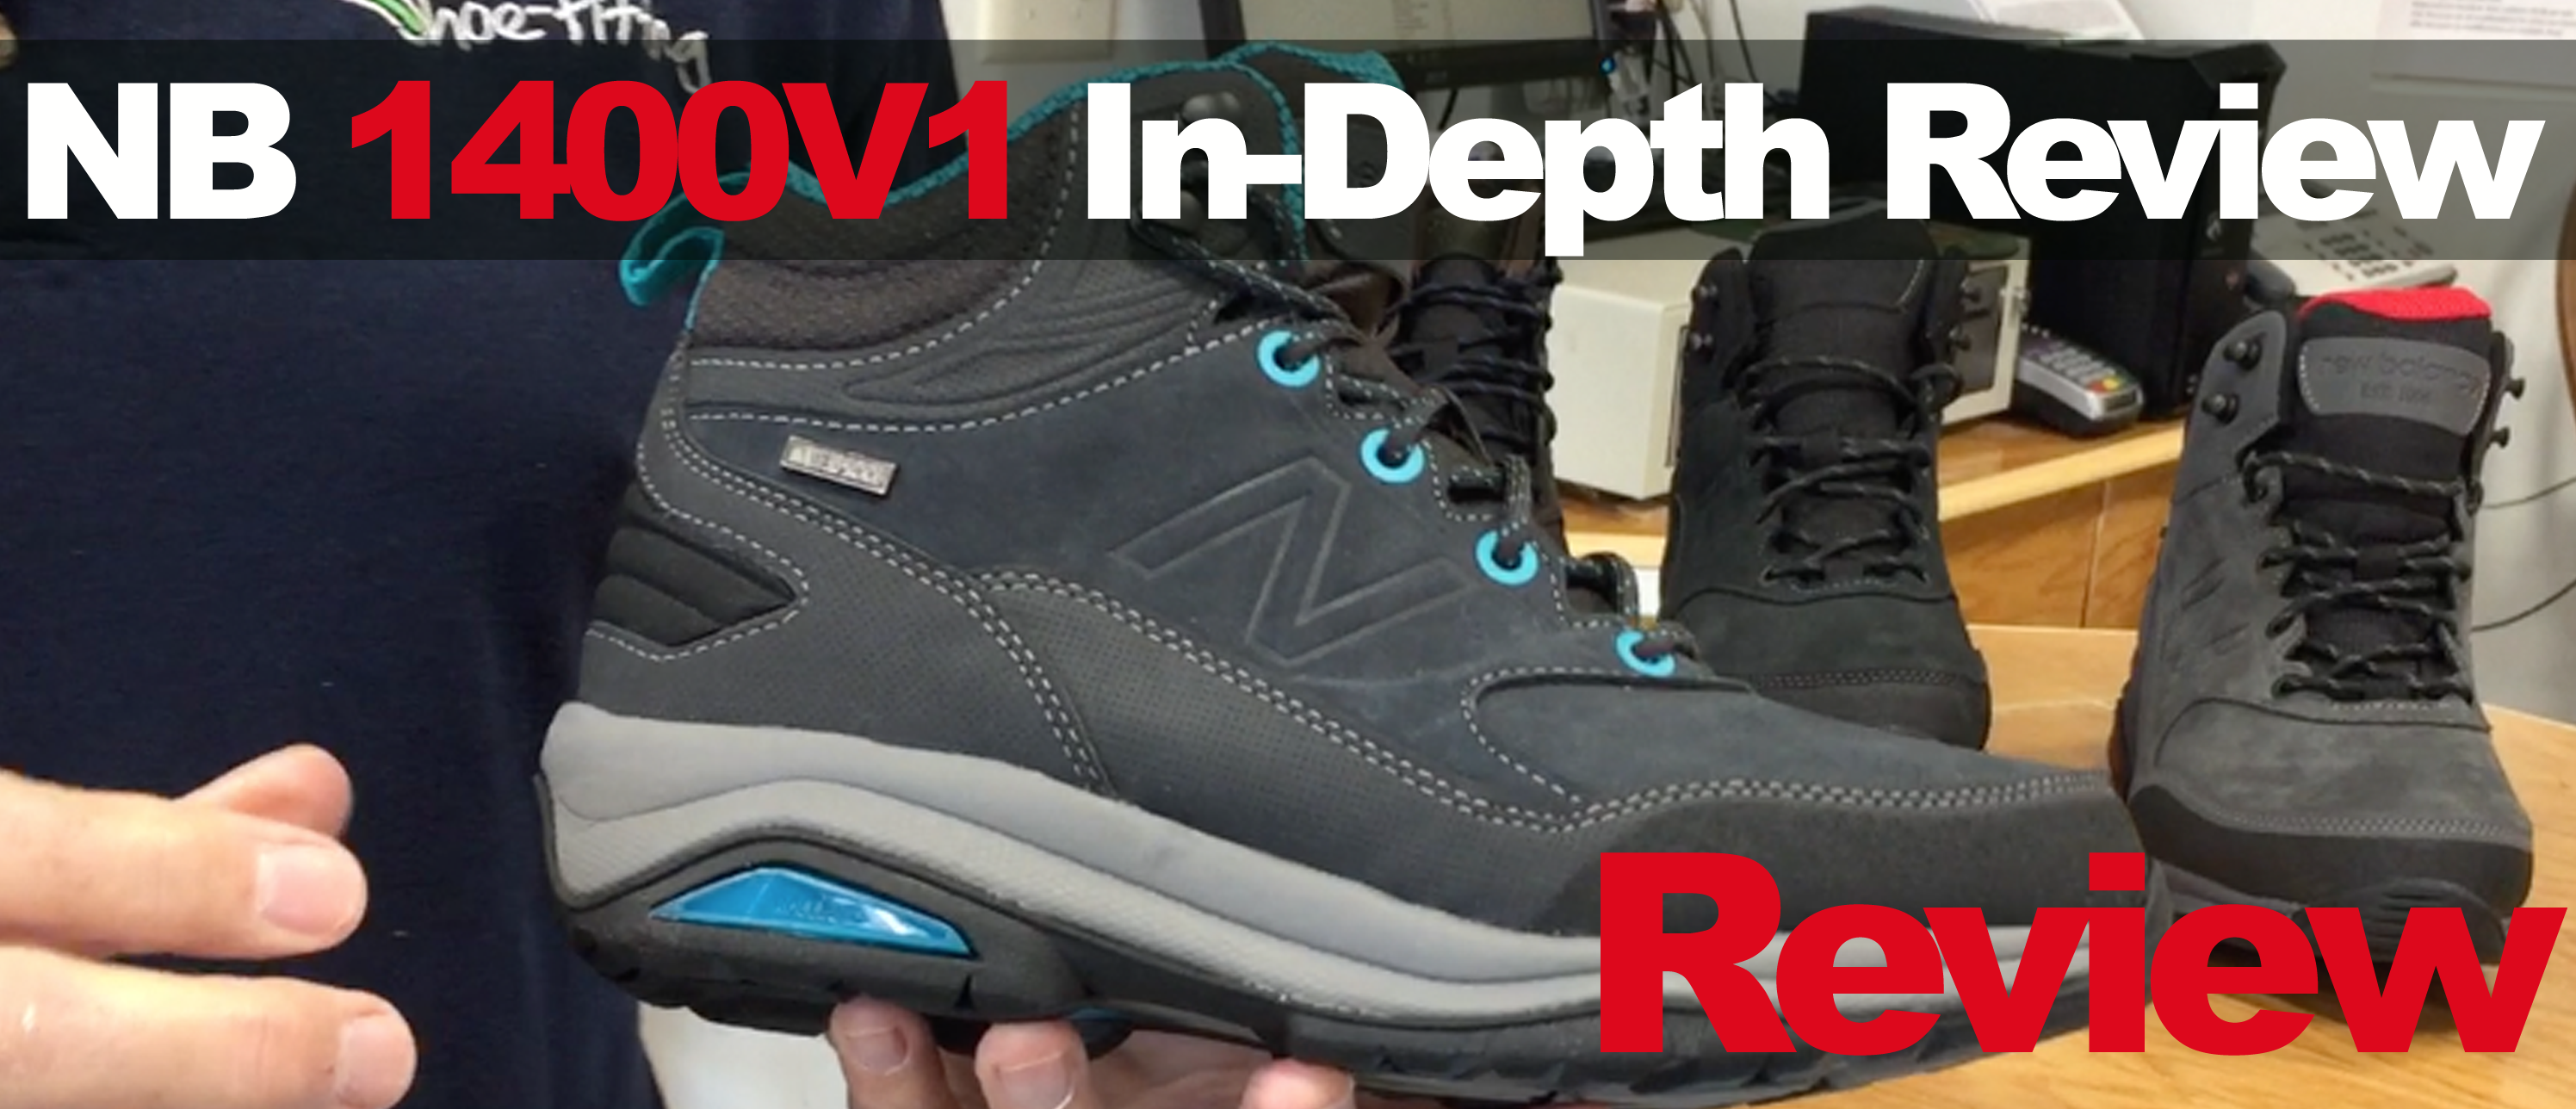 new balance 1400 hiking boot review